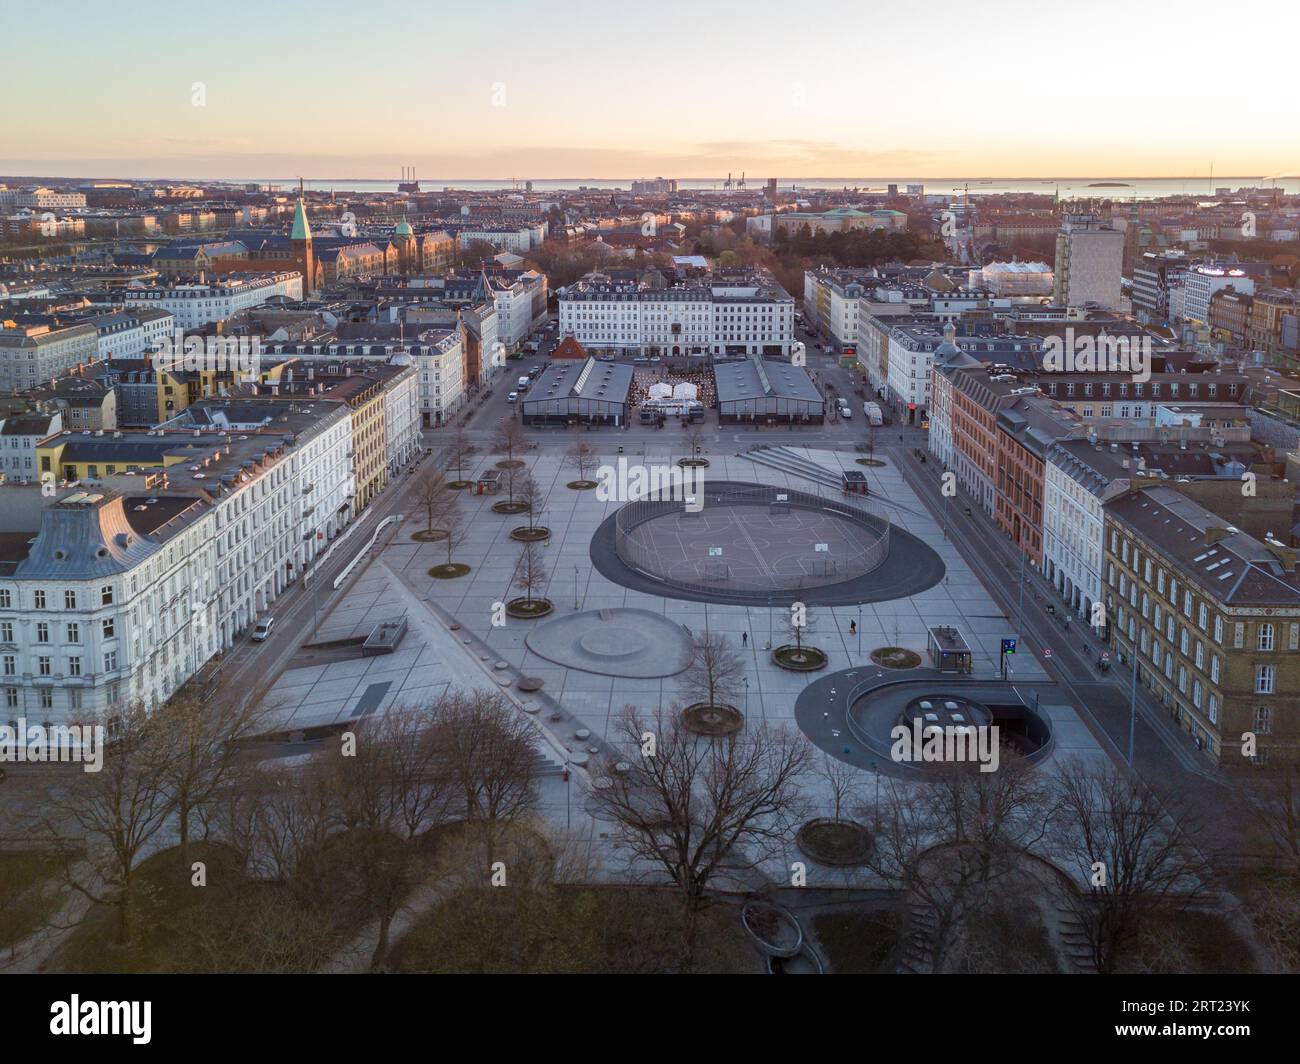 Copenhagen, Denmark, March 31, 2020: Aerial drone view Israels Plads and the market halls Stock Photo